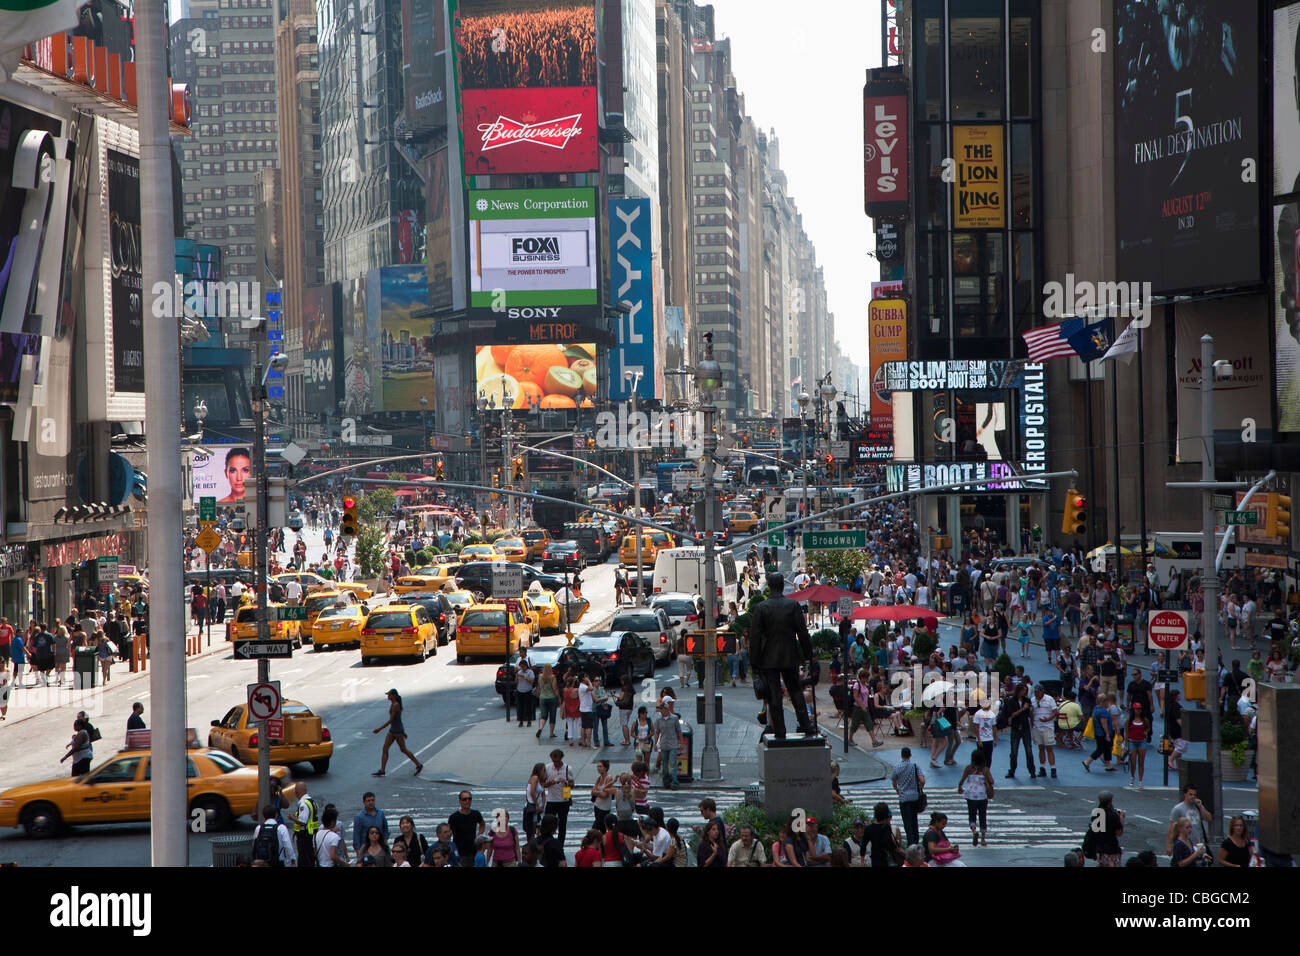 Times Square in New York, crowded with people and traffic Stock Photo